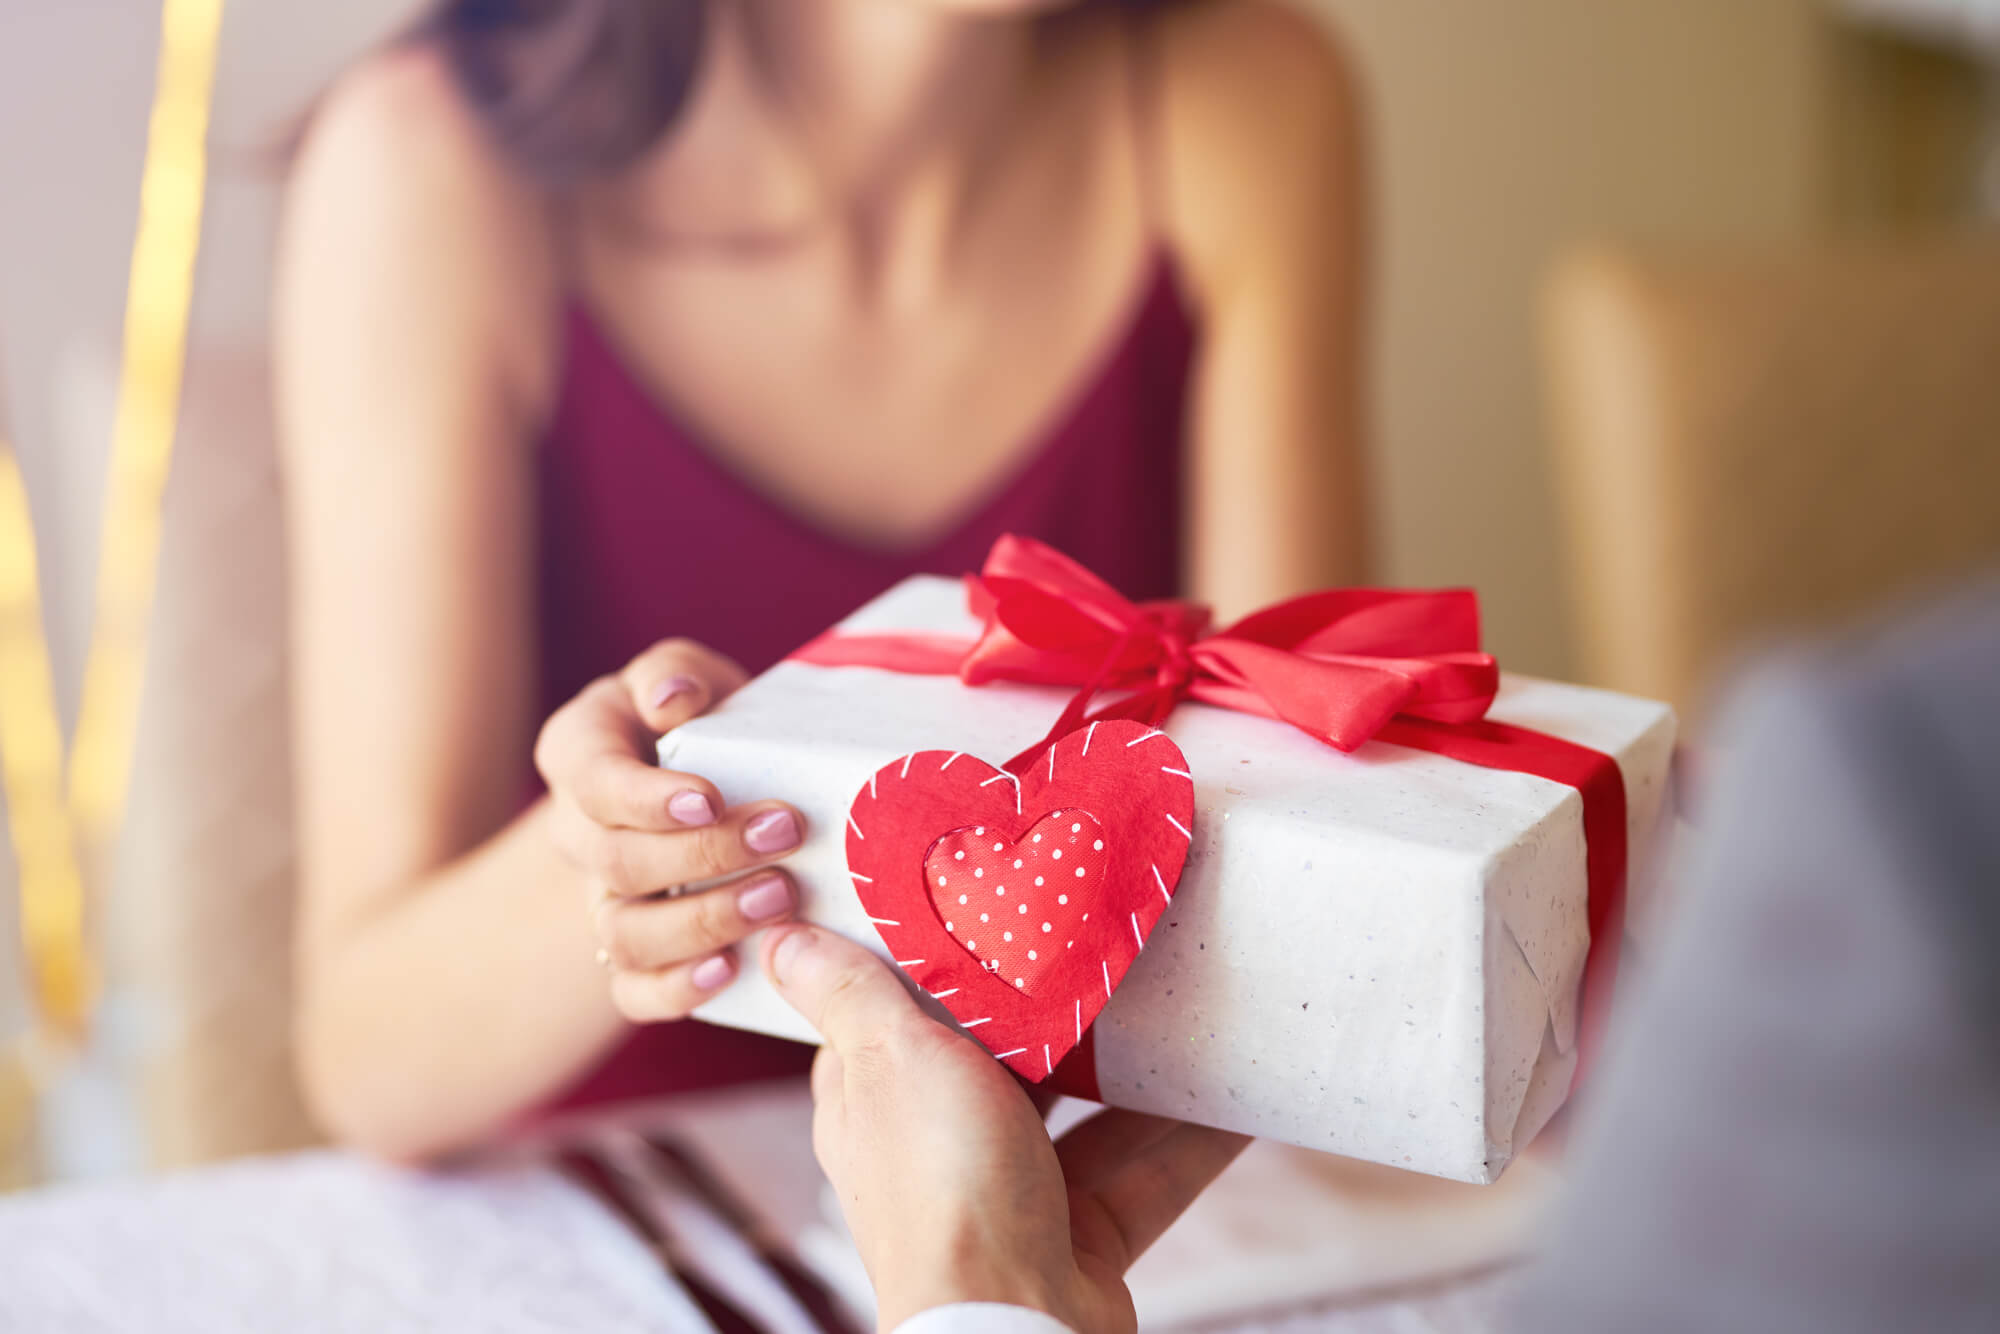 A person being handed a present wrapped in a red bow